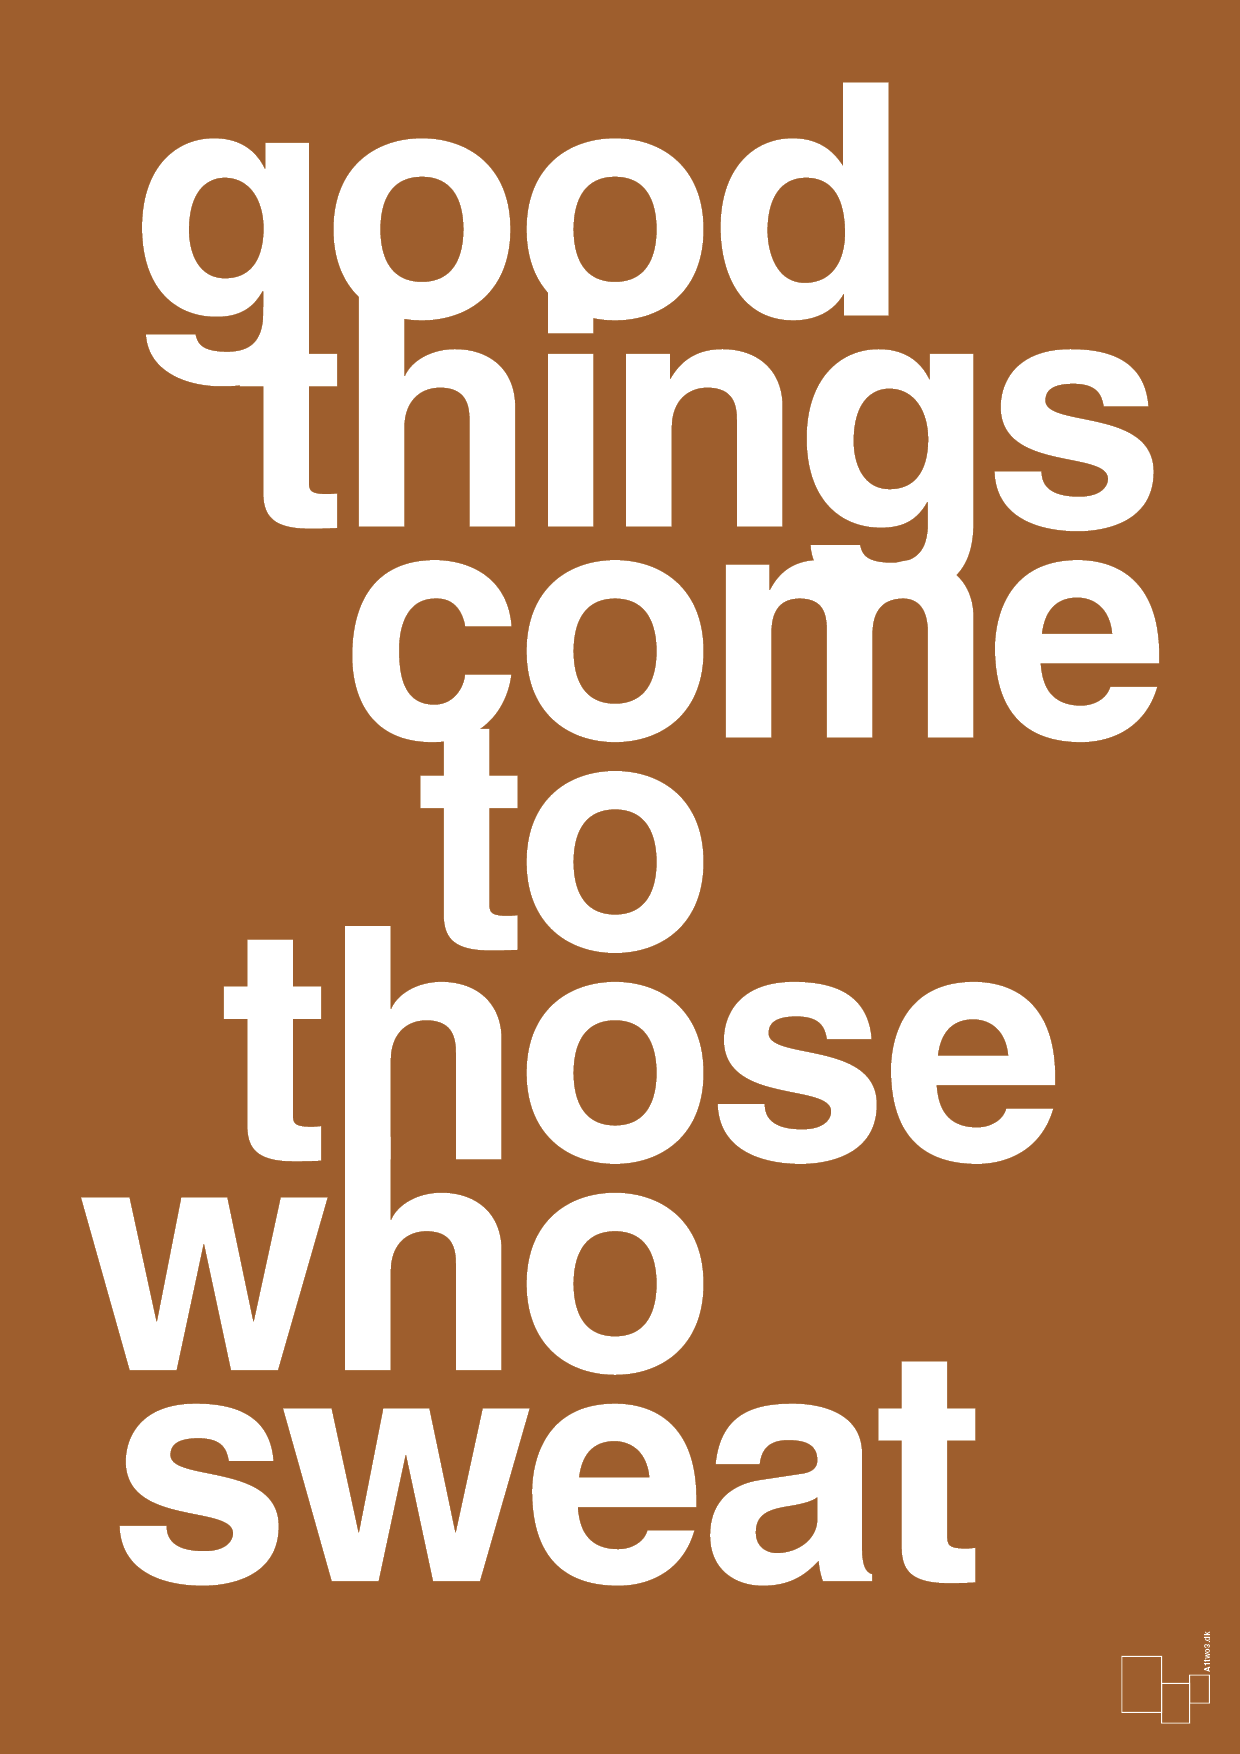 good things come to those who sweat - Plakat med Sport & Fritid i Cognac